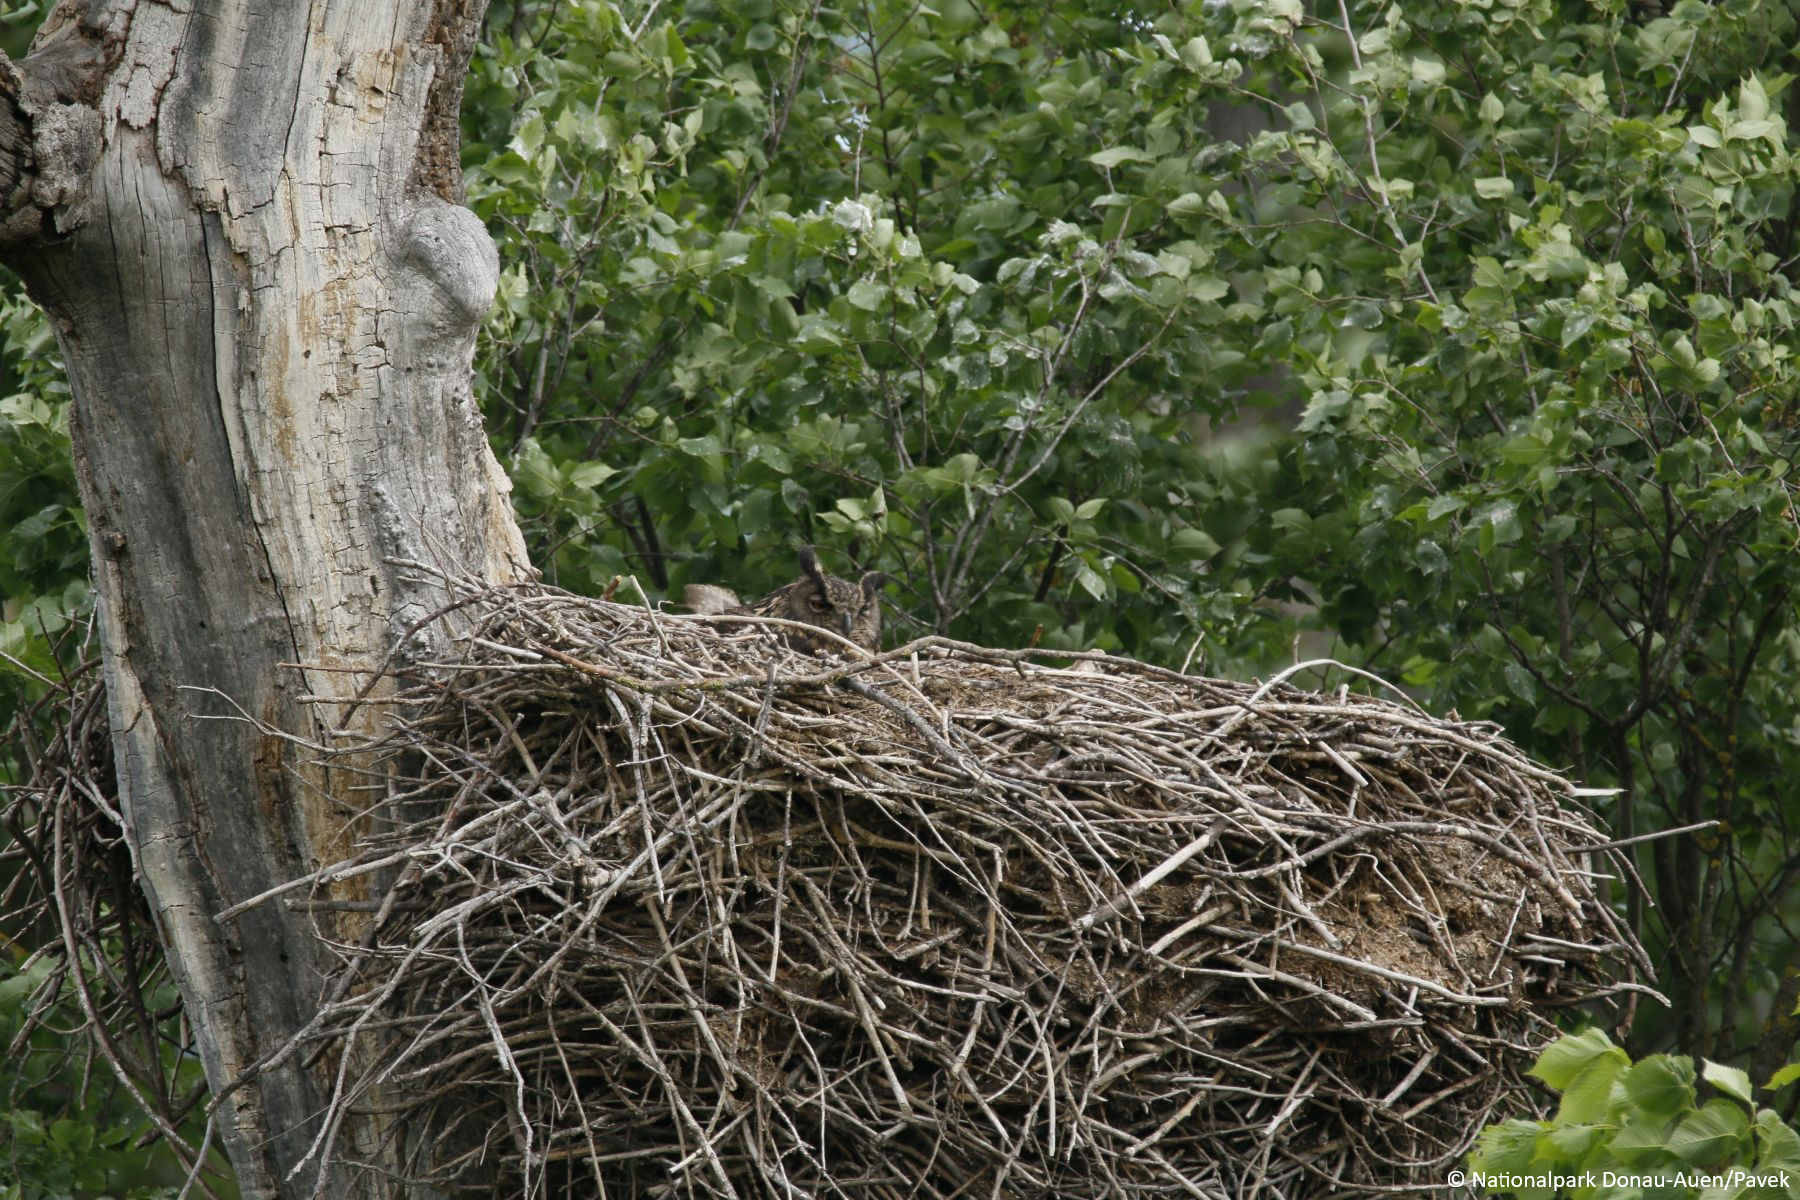 An owl in the nest